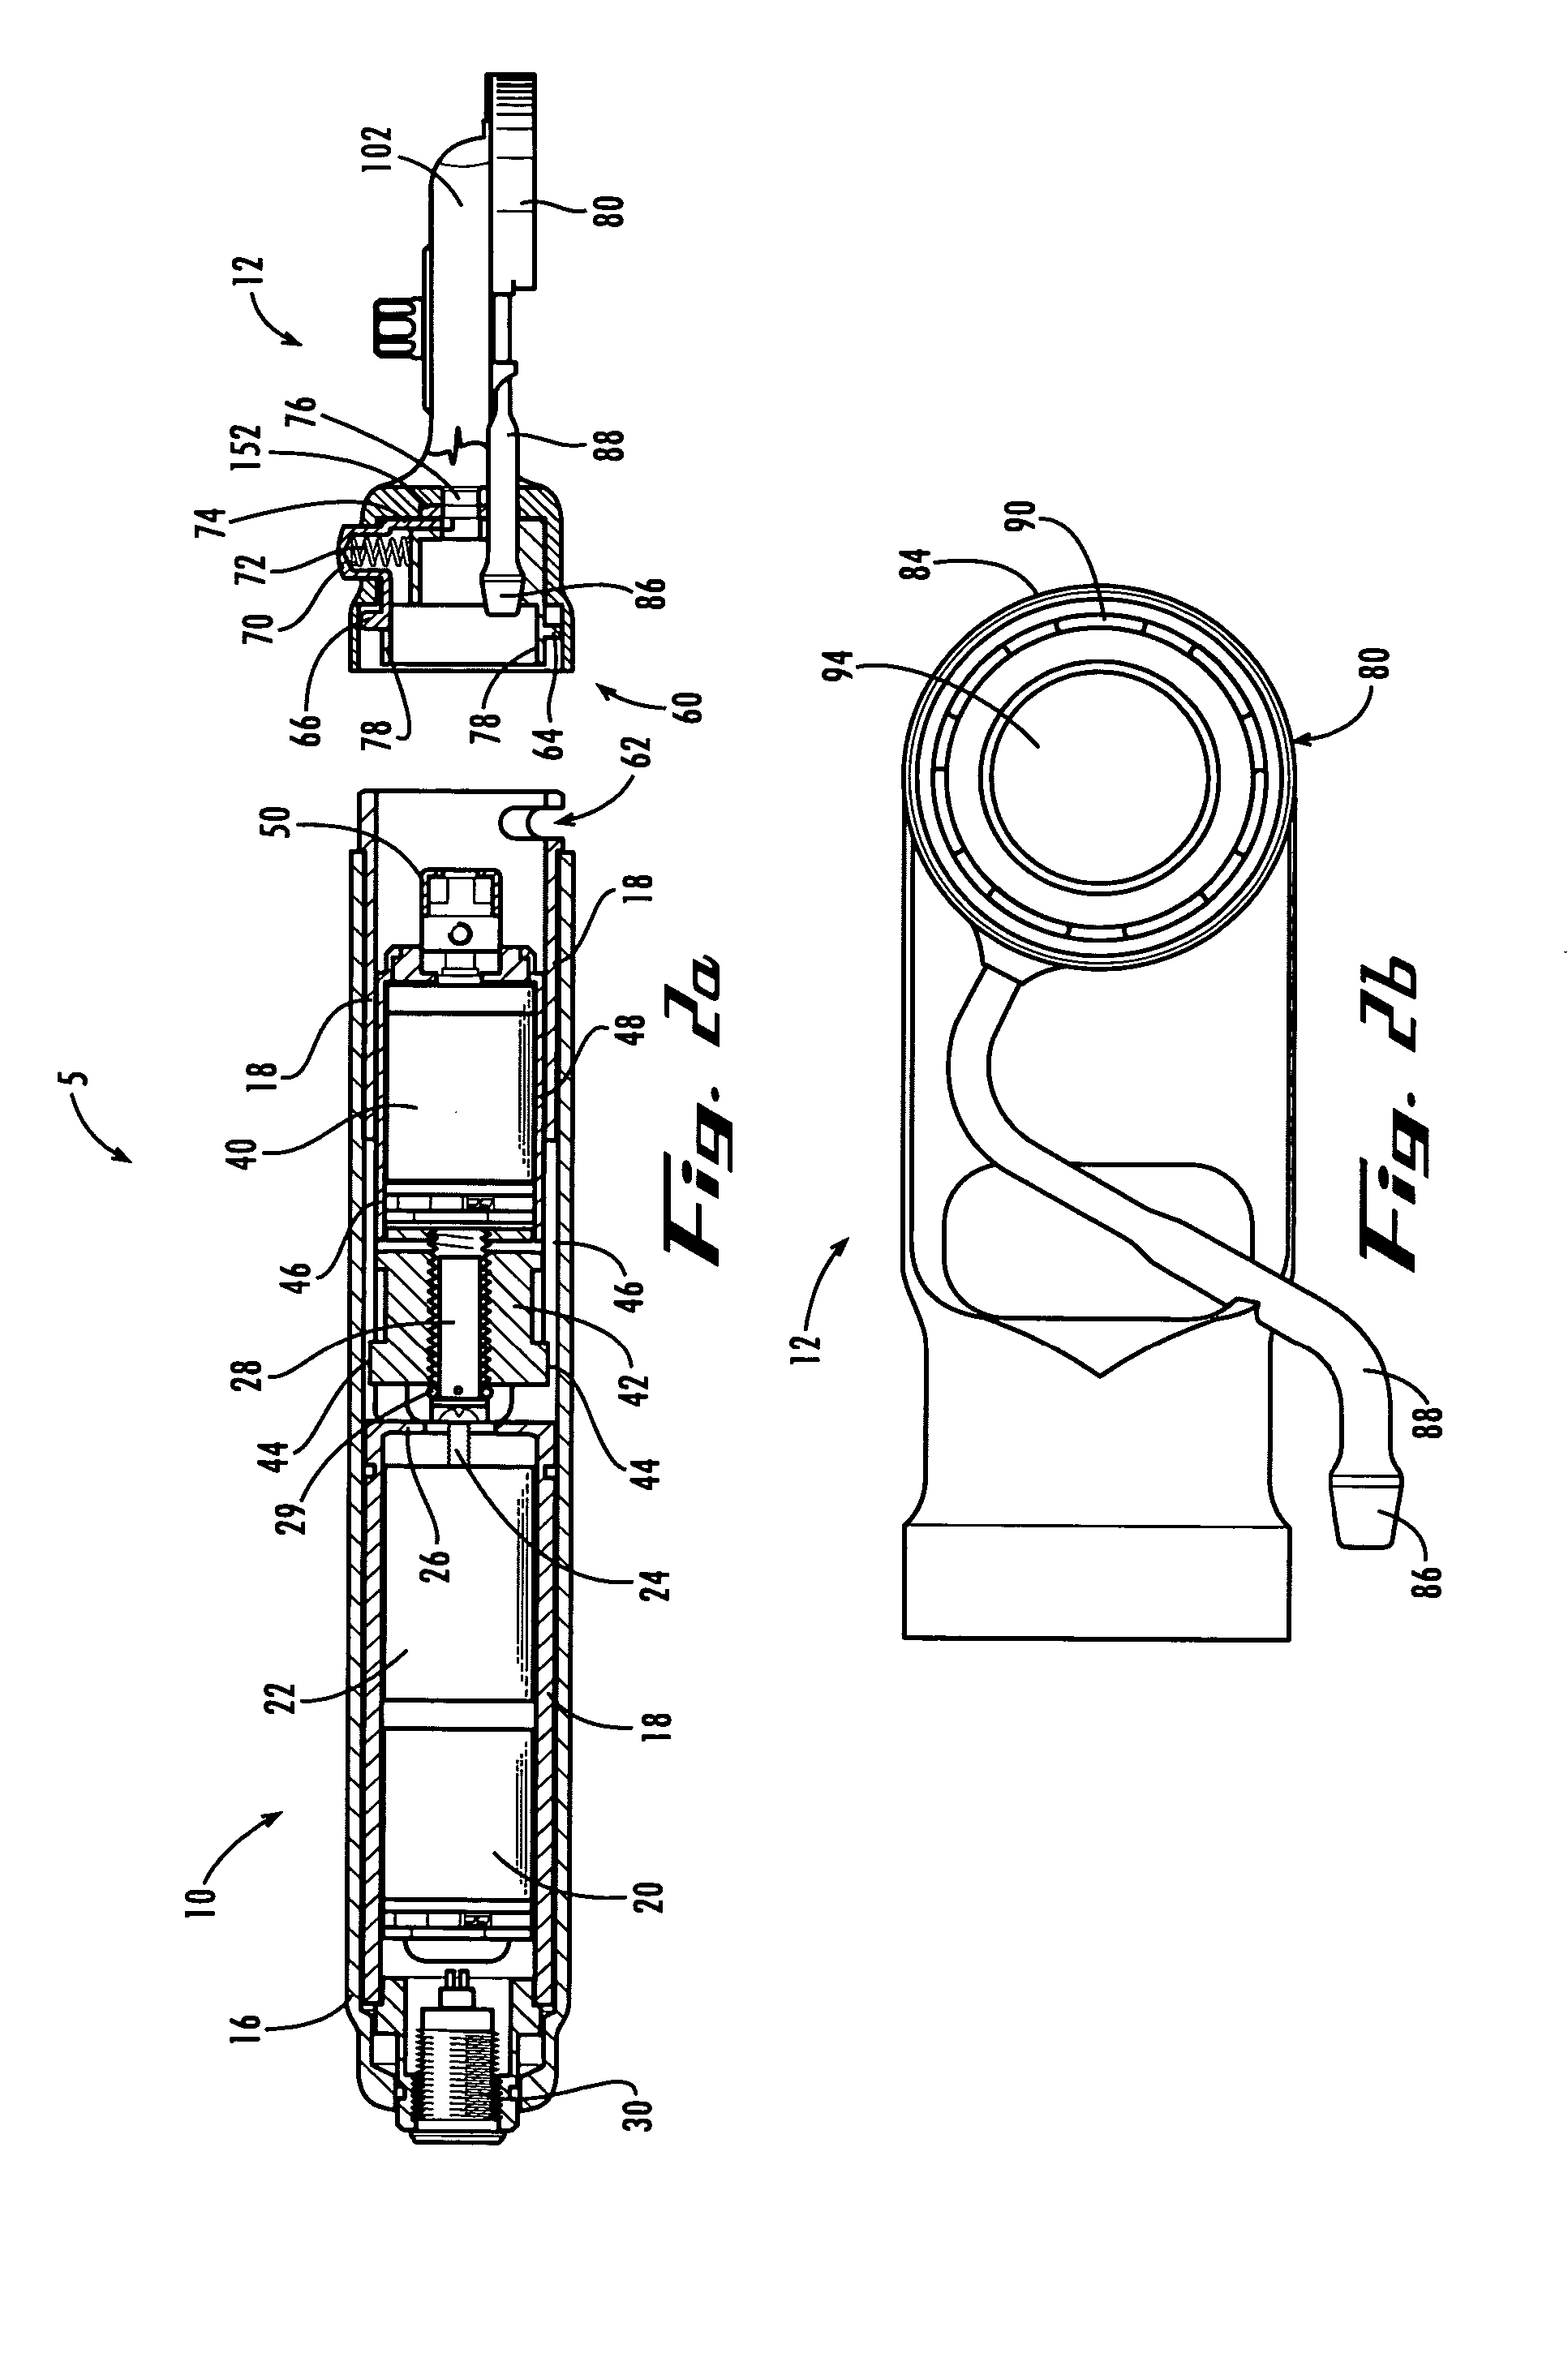 Device for separation of corneal epithelium